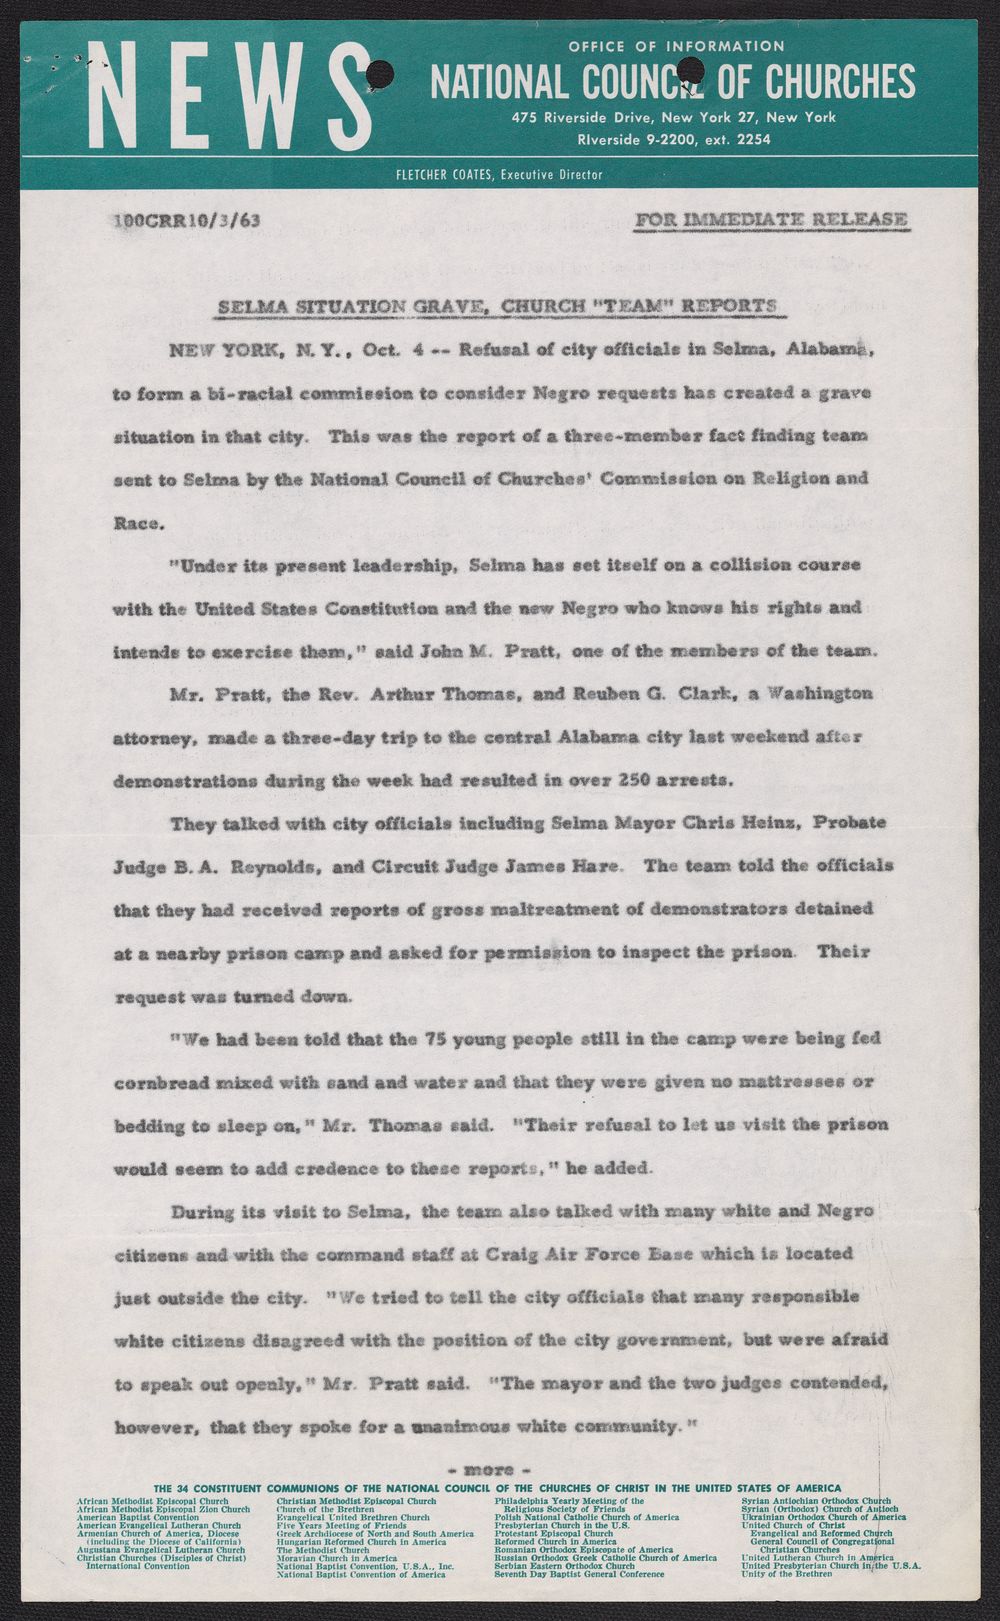 National Council of Churches Press Release about brewing problems in Selma, 1963